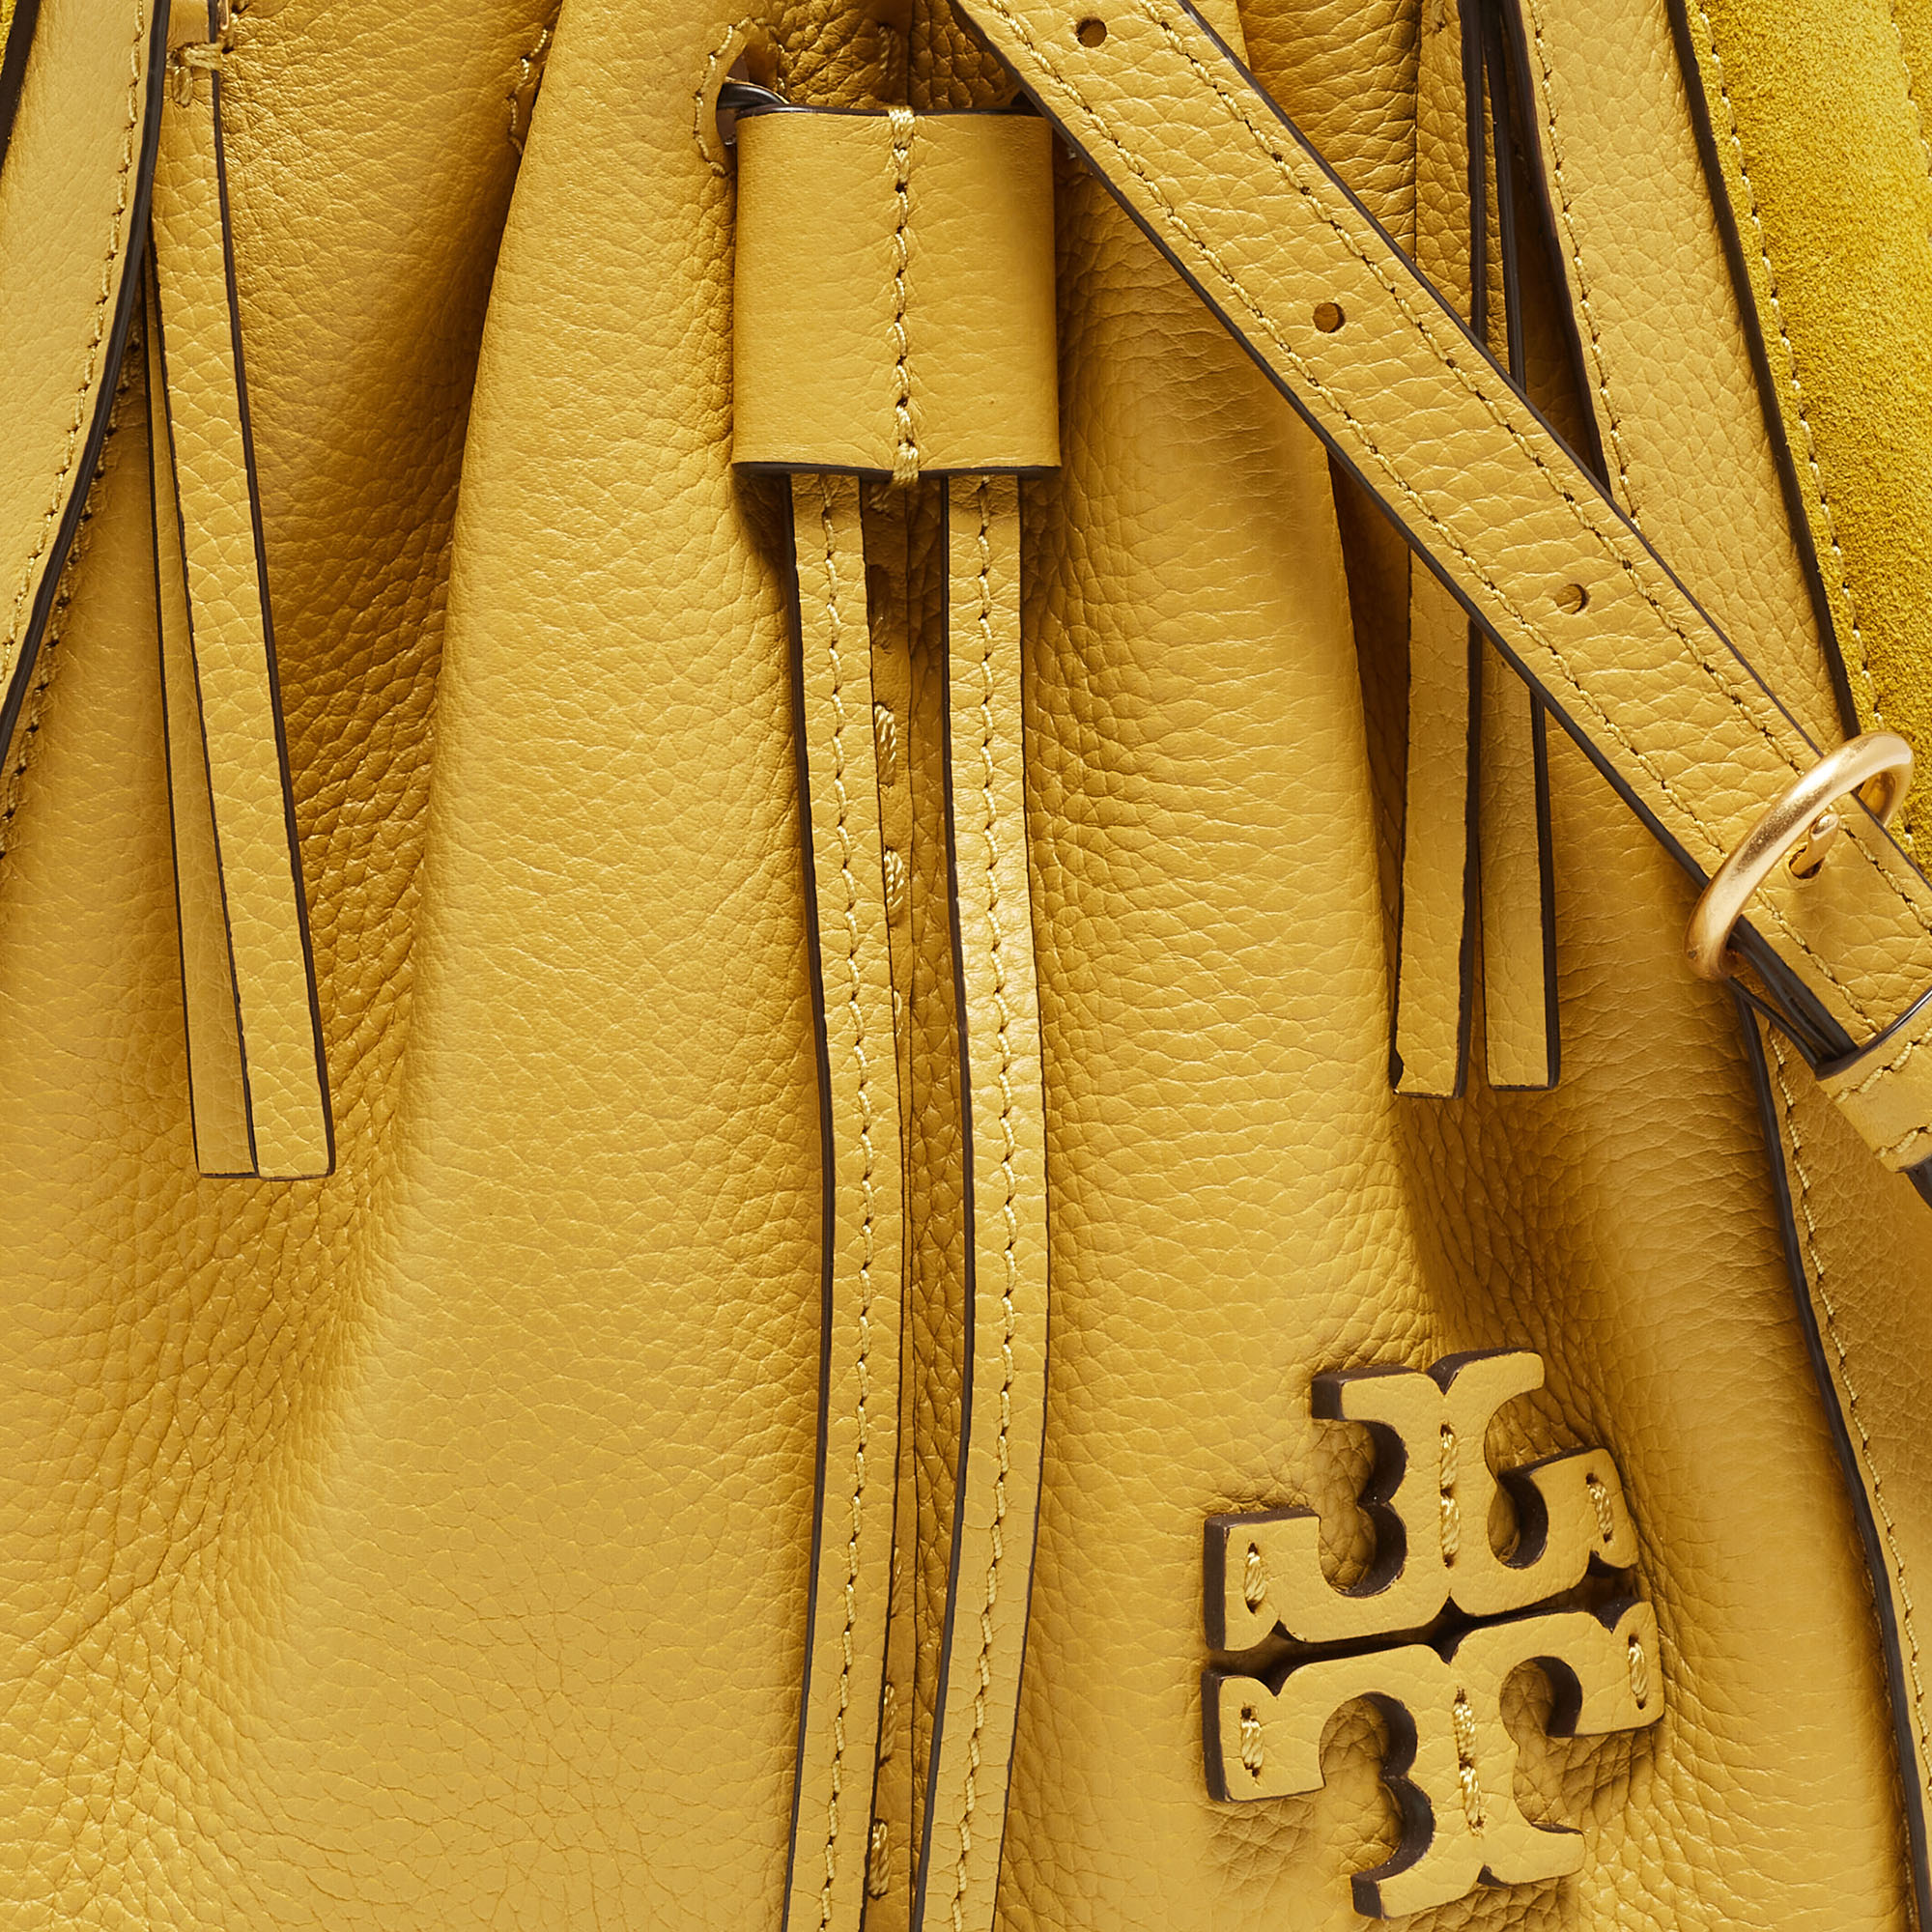 Tory Burch Yellow Leather And Suede McGraw Dragonfly Drawstring Bag